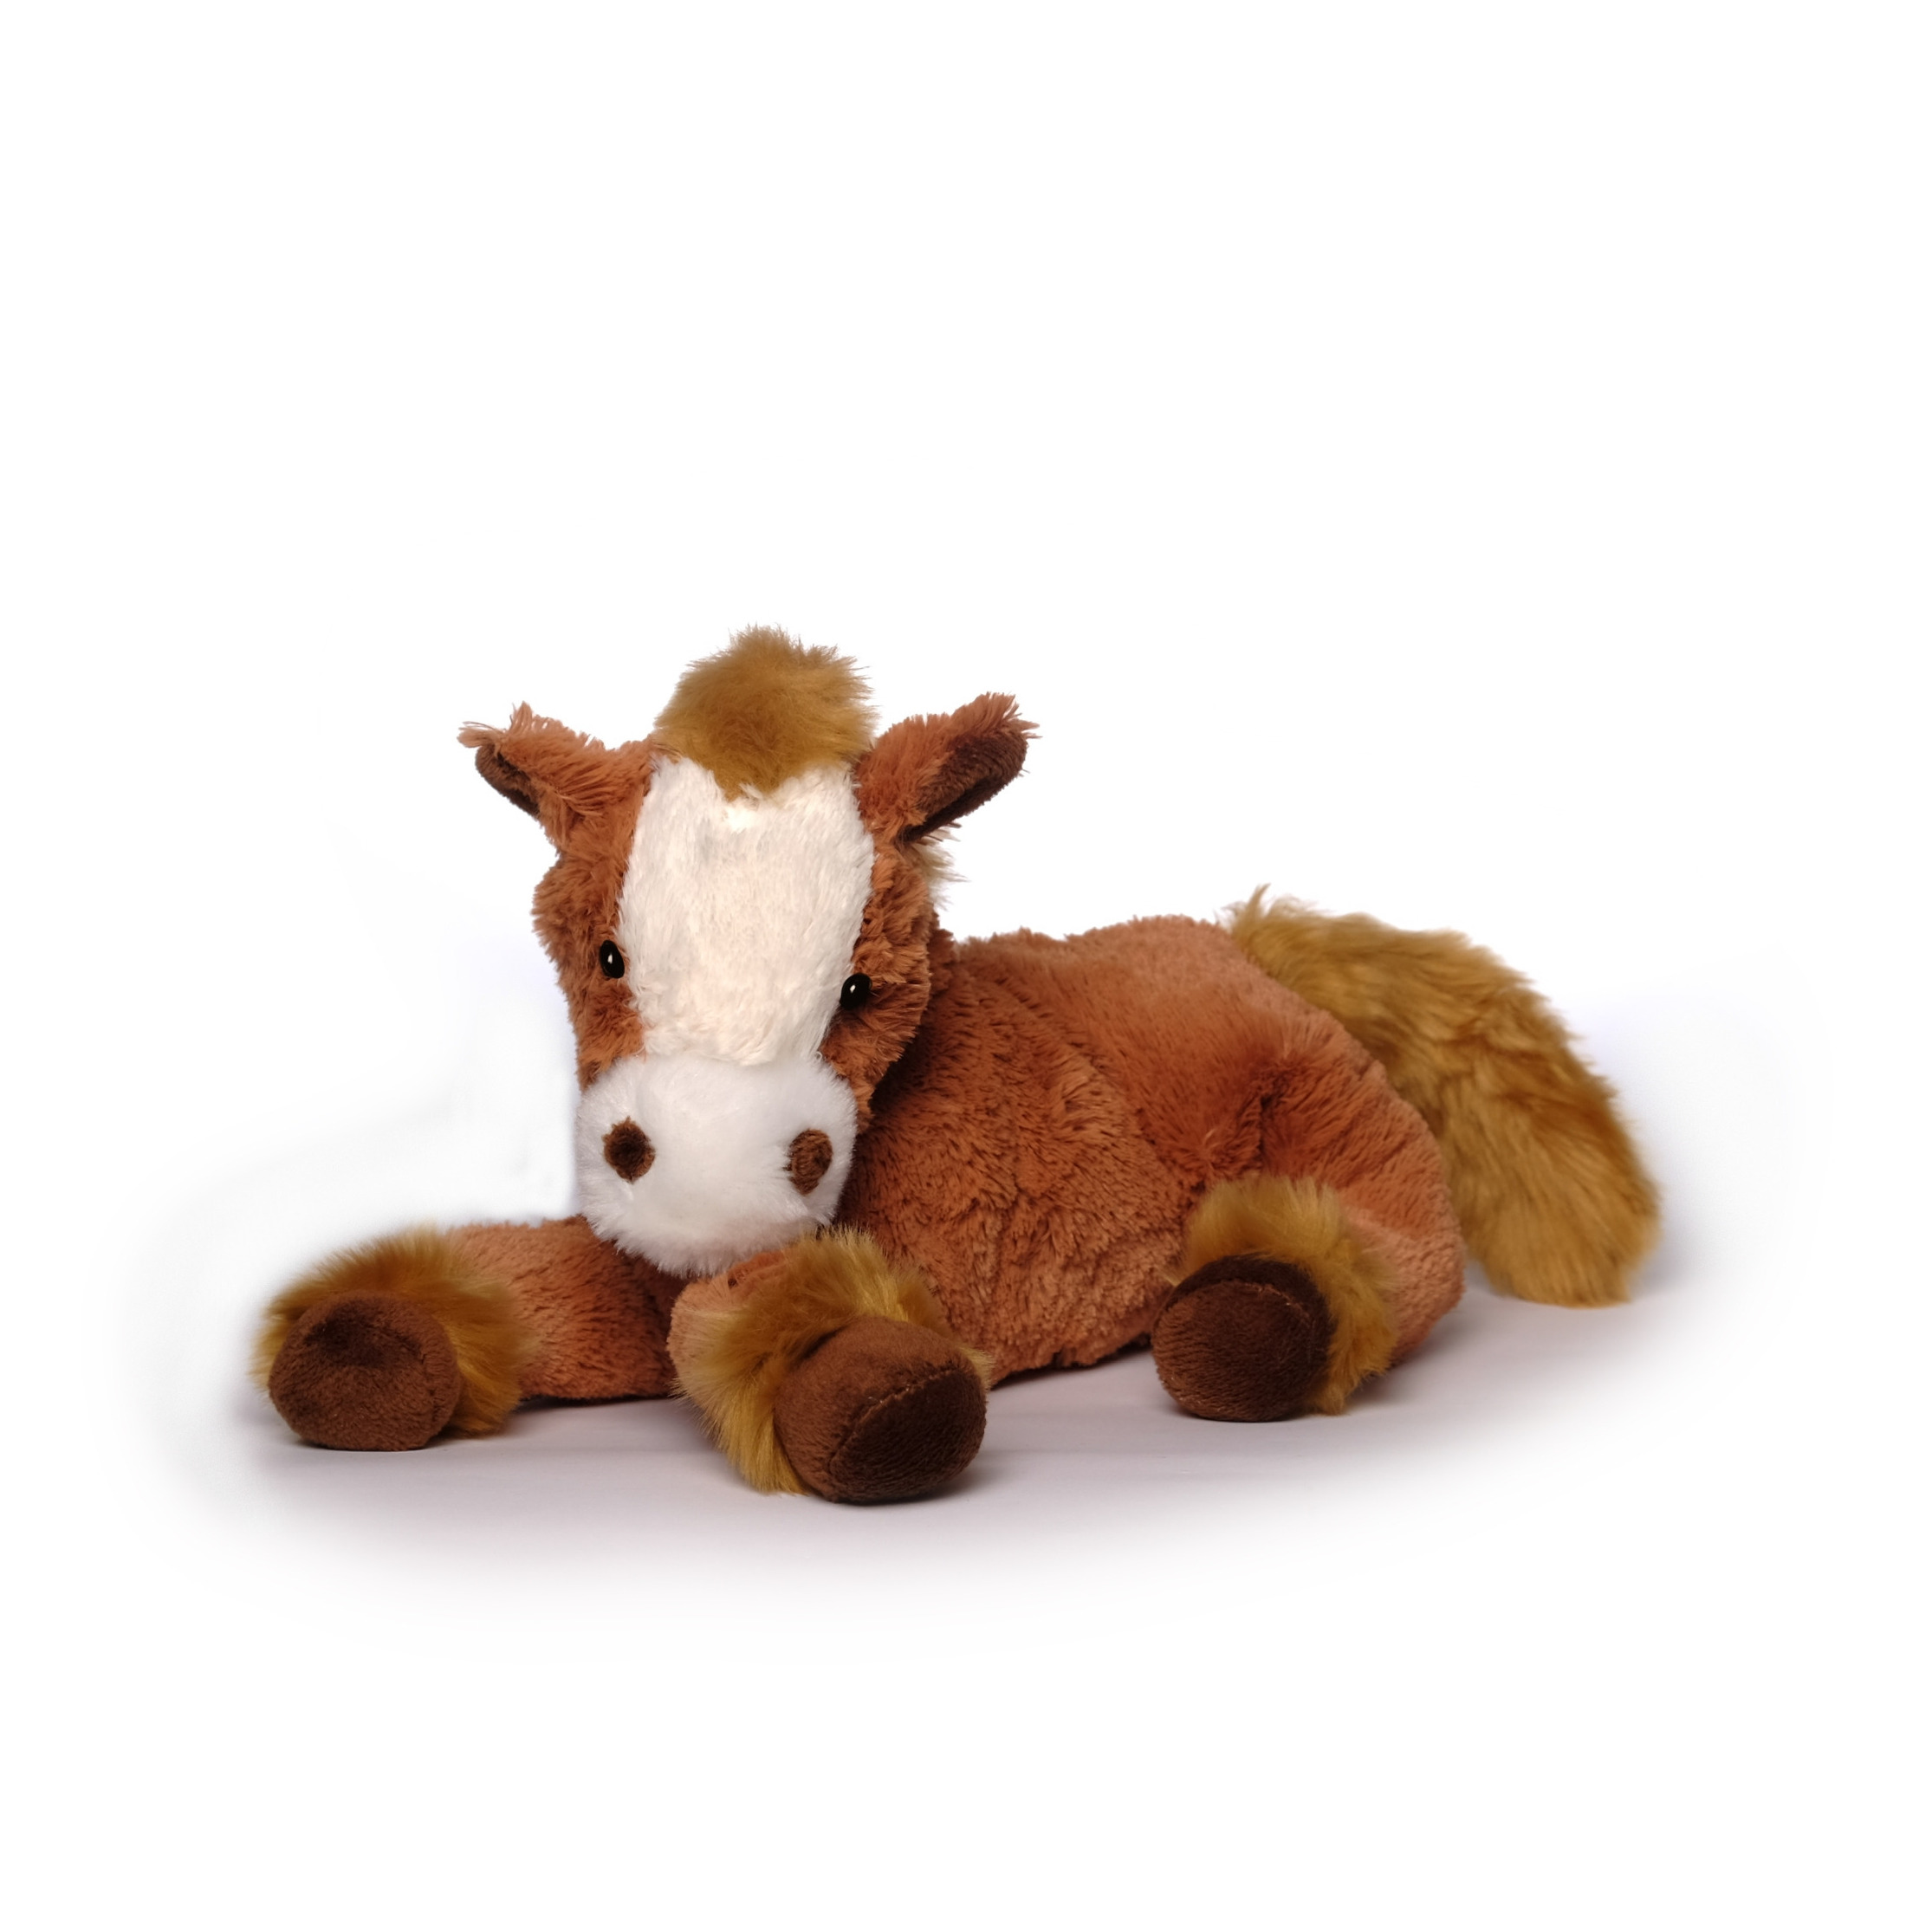 Inware Pluche paard knuffel - liggend - bruin - polyester - 30 cm -